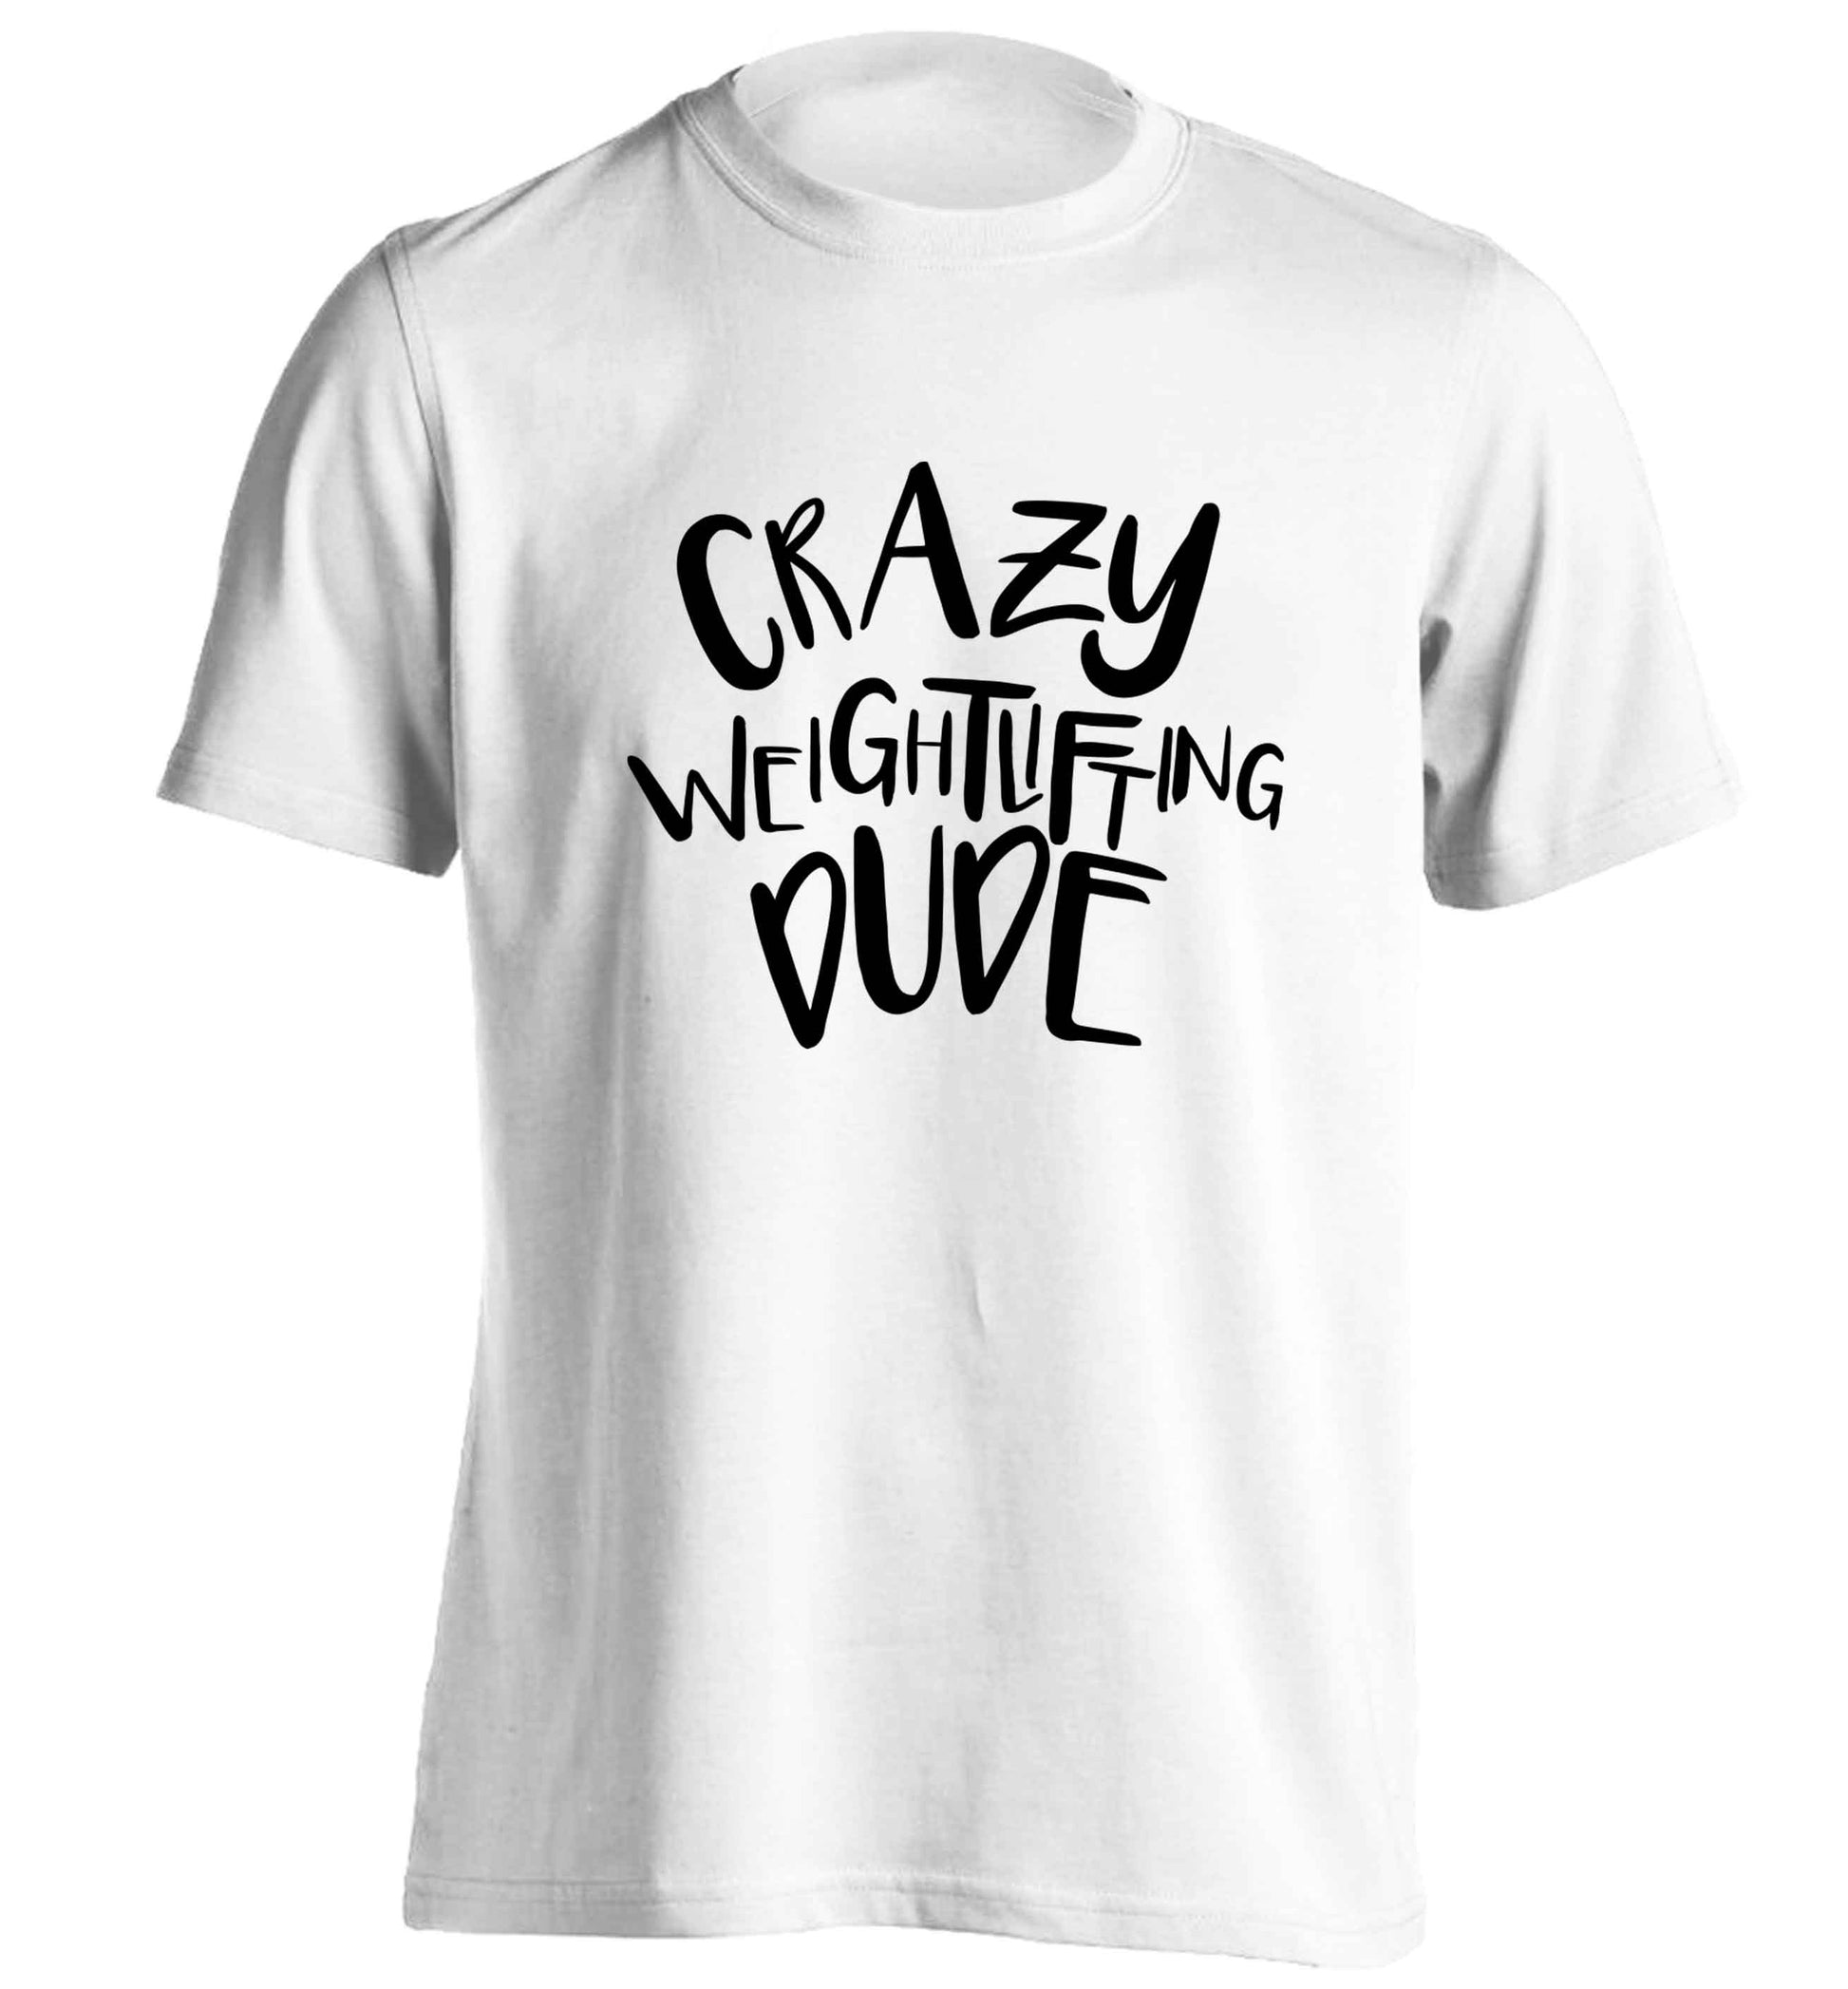 Crazy weightlifting dude adults unisex white Tshirt 2XL